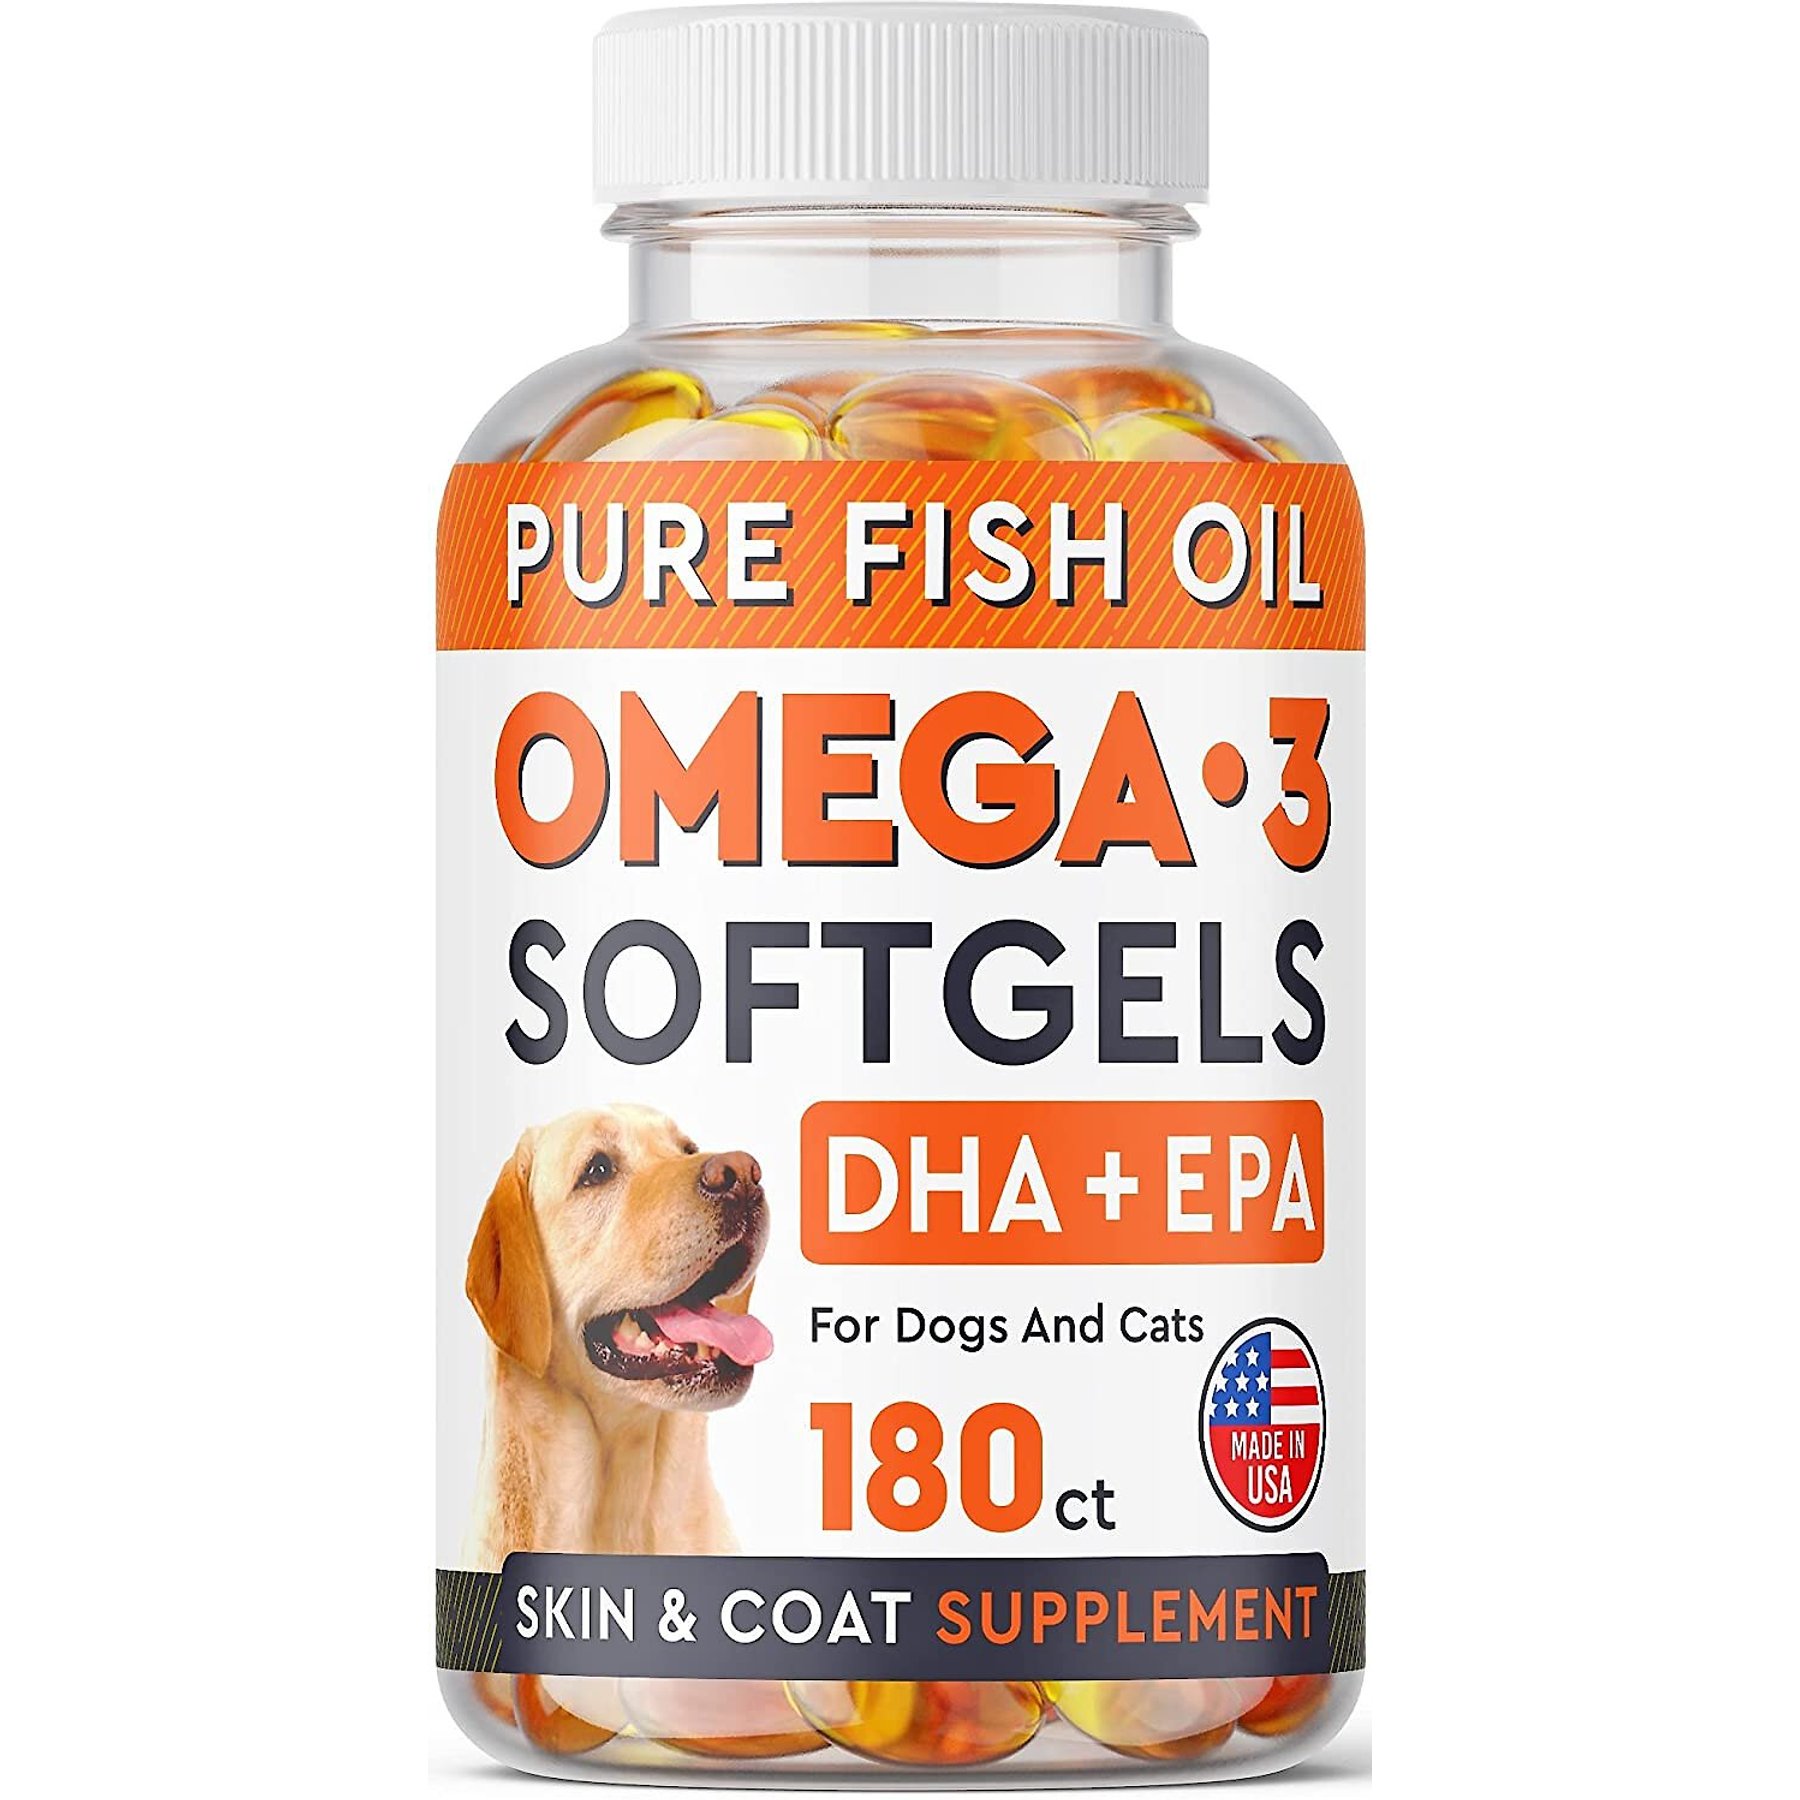  Salmon Oil for Dogs & Cats - Healthy Skin & Coat, Fish Oil, Omega  3 EPA DHA, Liquid Food Supplement for Pets, All Natural, Supports Joint &  Bone Health, Natural